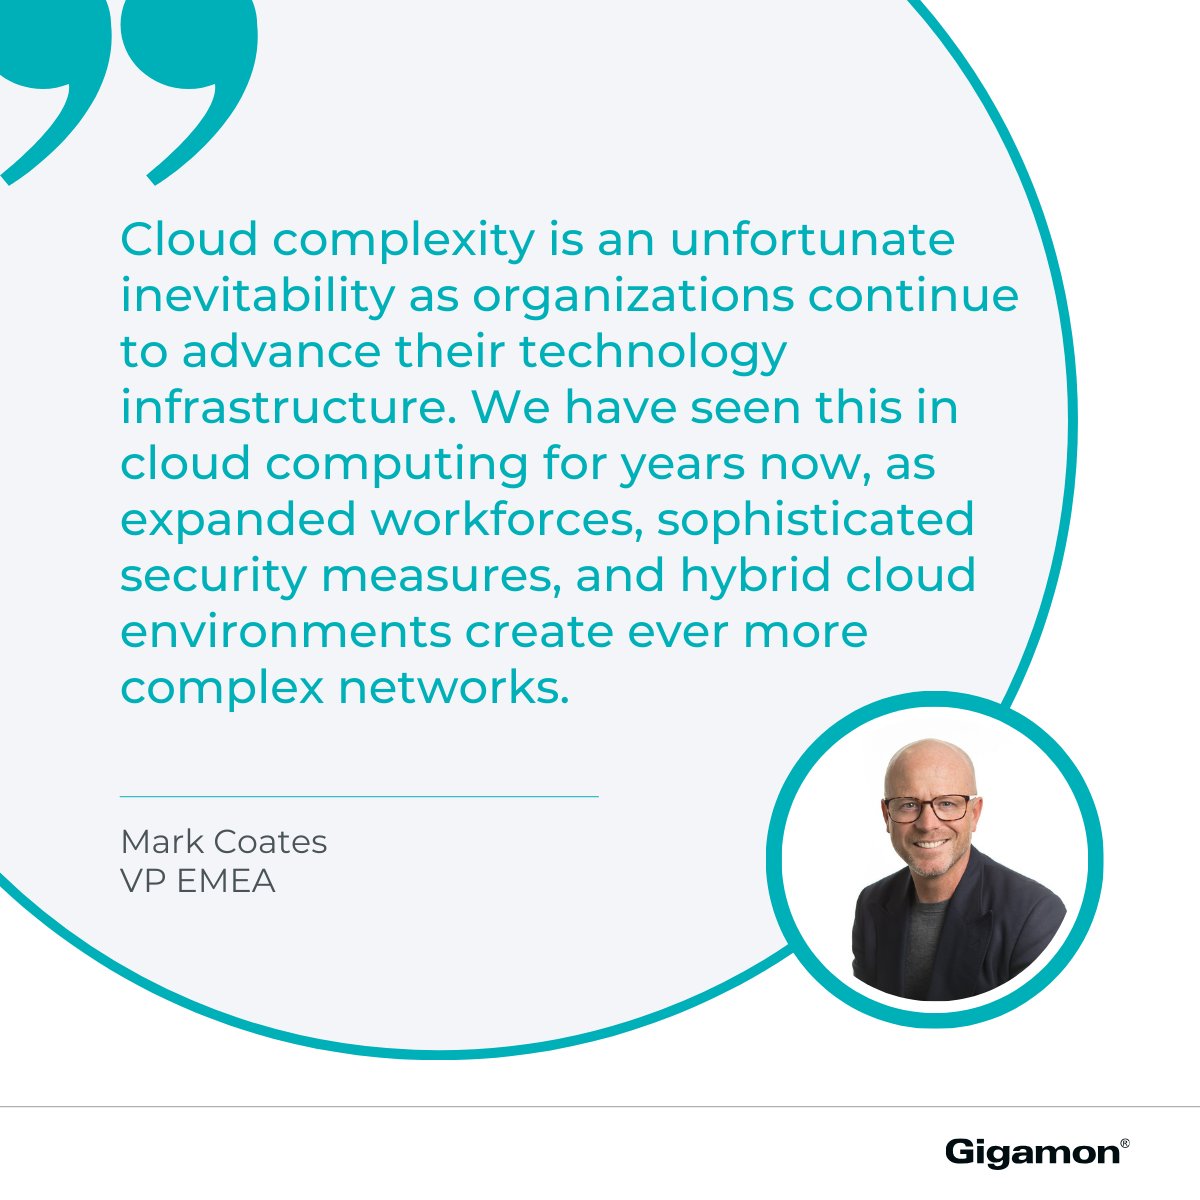 ☁️ Cloud complexity is inevitable, but savings are still possible by focusing on increasing tools and infrastructure efficiency. Learn how to optimize your cloud environment: ow.ly/AcsT50Rlerg #HybridCloud #CloudSecurity